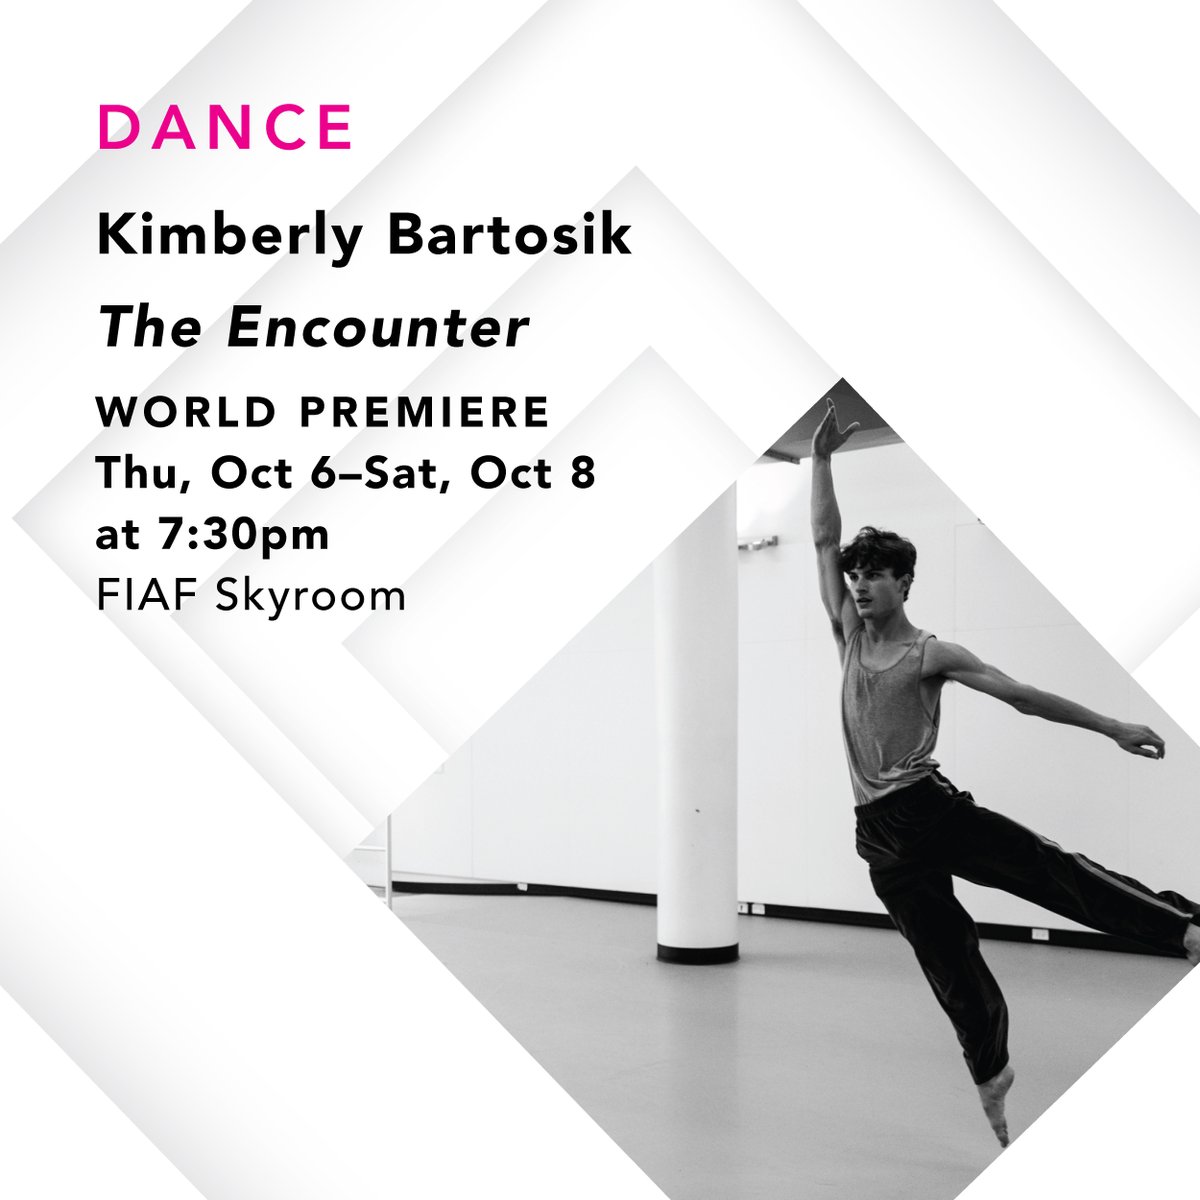 Don't miss the world premiere of Kimberly Bartosik's 'The Encounter,' this Thursday Oct. 6 through Saturday, Oct. 8, 7:30p in FIAF's Sky room. Get your tickets here: bit.ly/3ft7agB #fiafny #CTL2022 #dance #crossingthelinefestival @TatyanaFranck